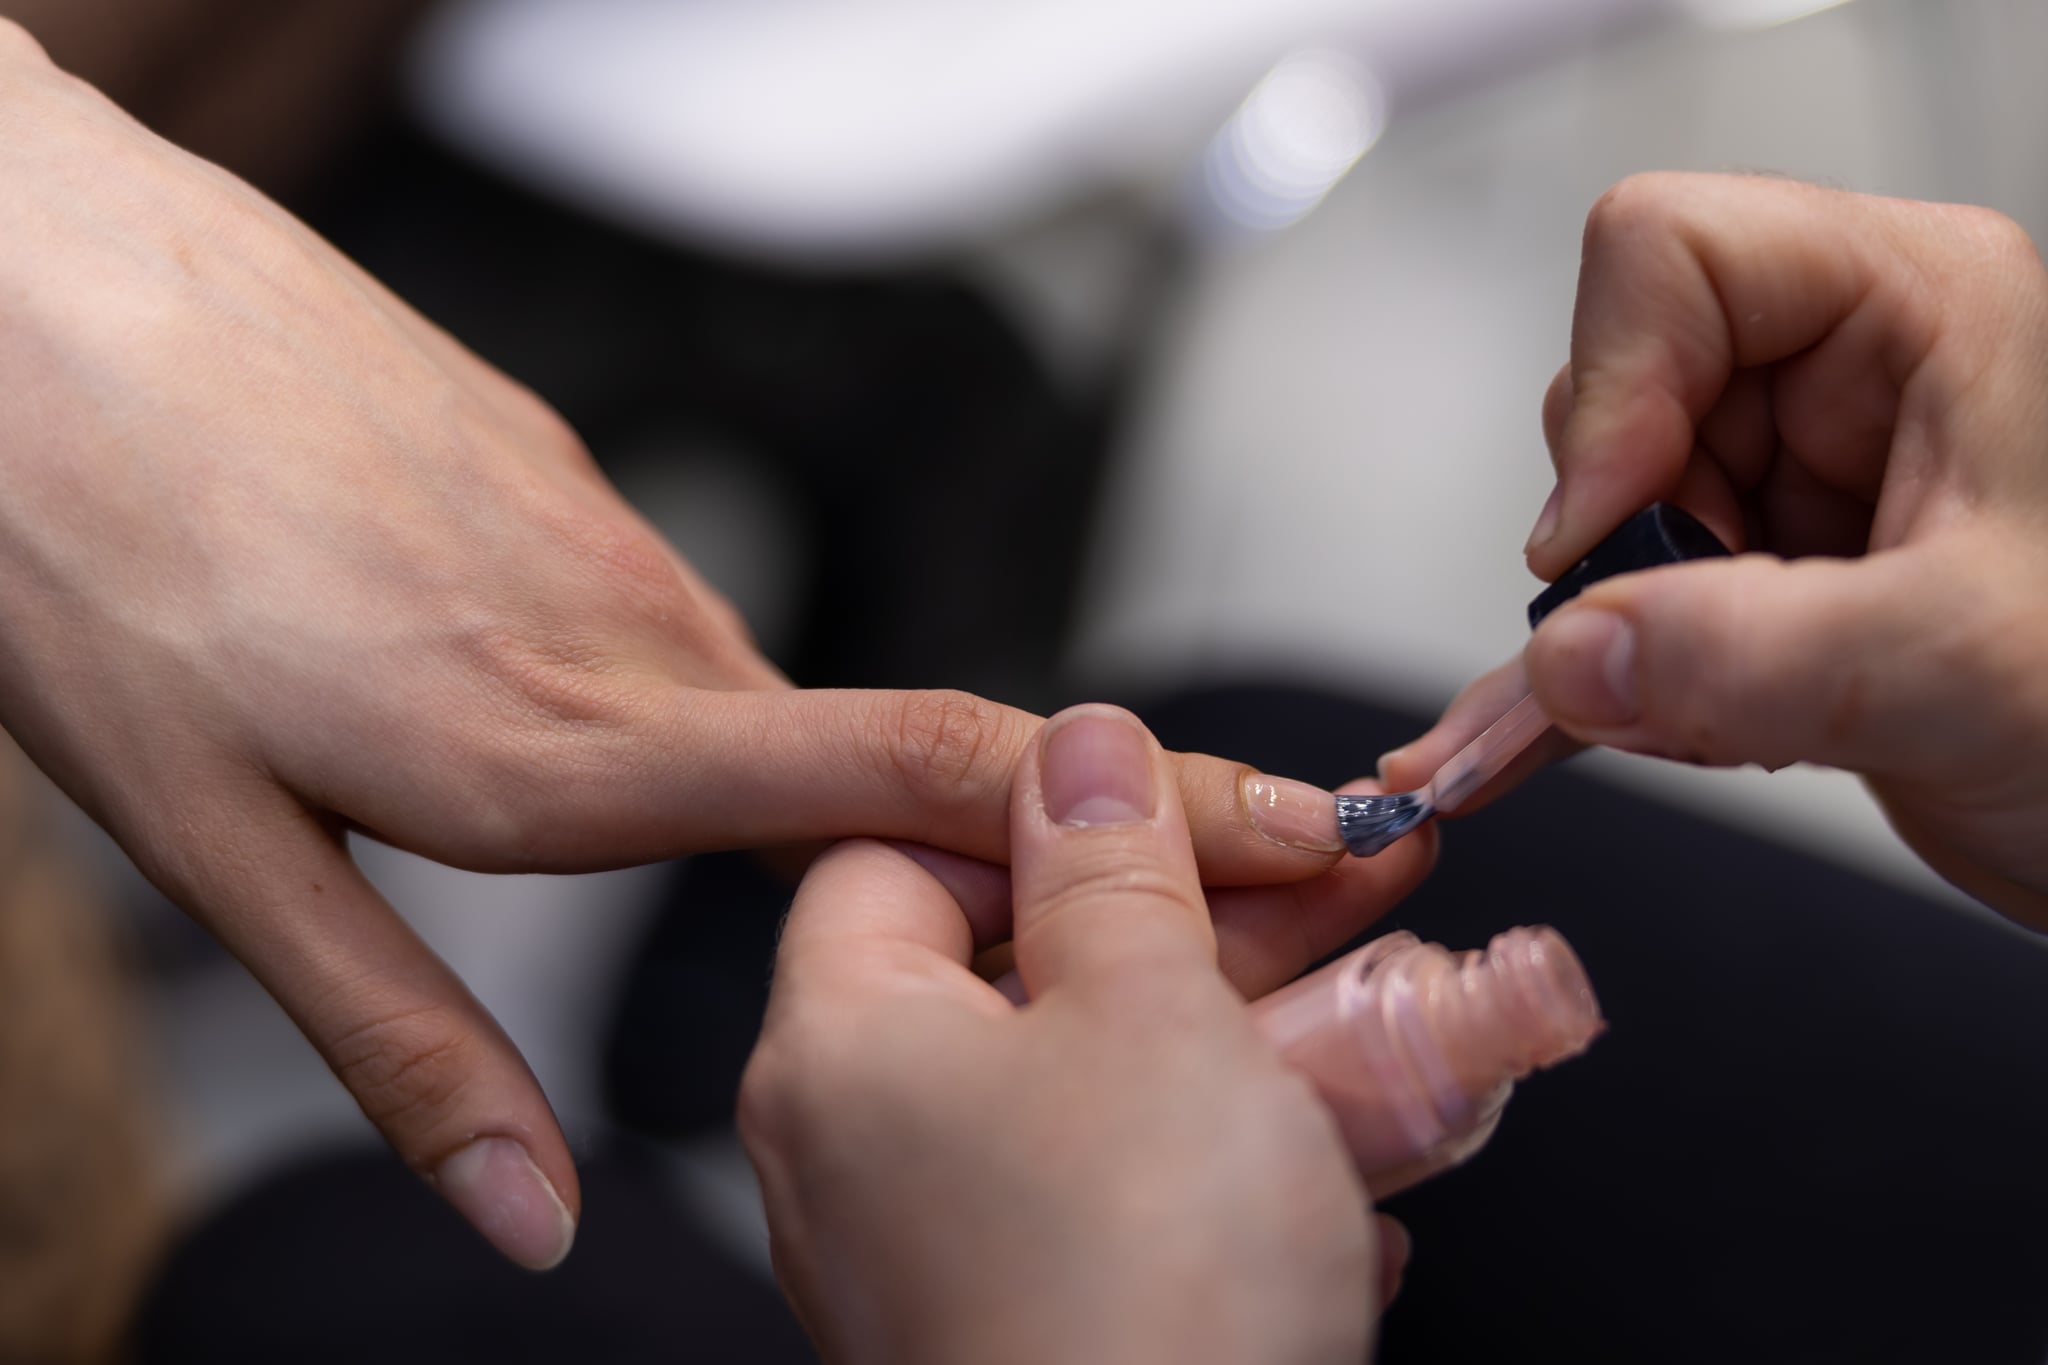 PARIS, FRANCE - OCTOBER 03: (EDITORIAL USE ONLY - For Non-Editorial use please seek approval from Fashion House) A model gets nails done in the backstage prior to the Germanier Womenswear Spring/Summer 2023 show as part of Paris Fashion Week on October 03, 2022 in Paris, France. (Photo by Justin Shin/WireImage )